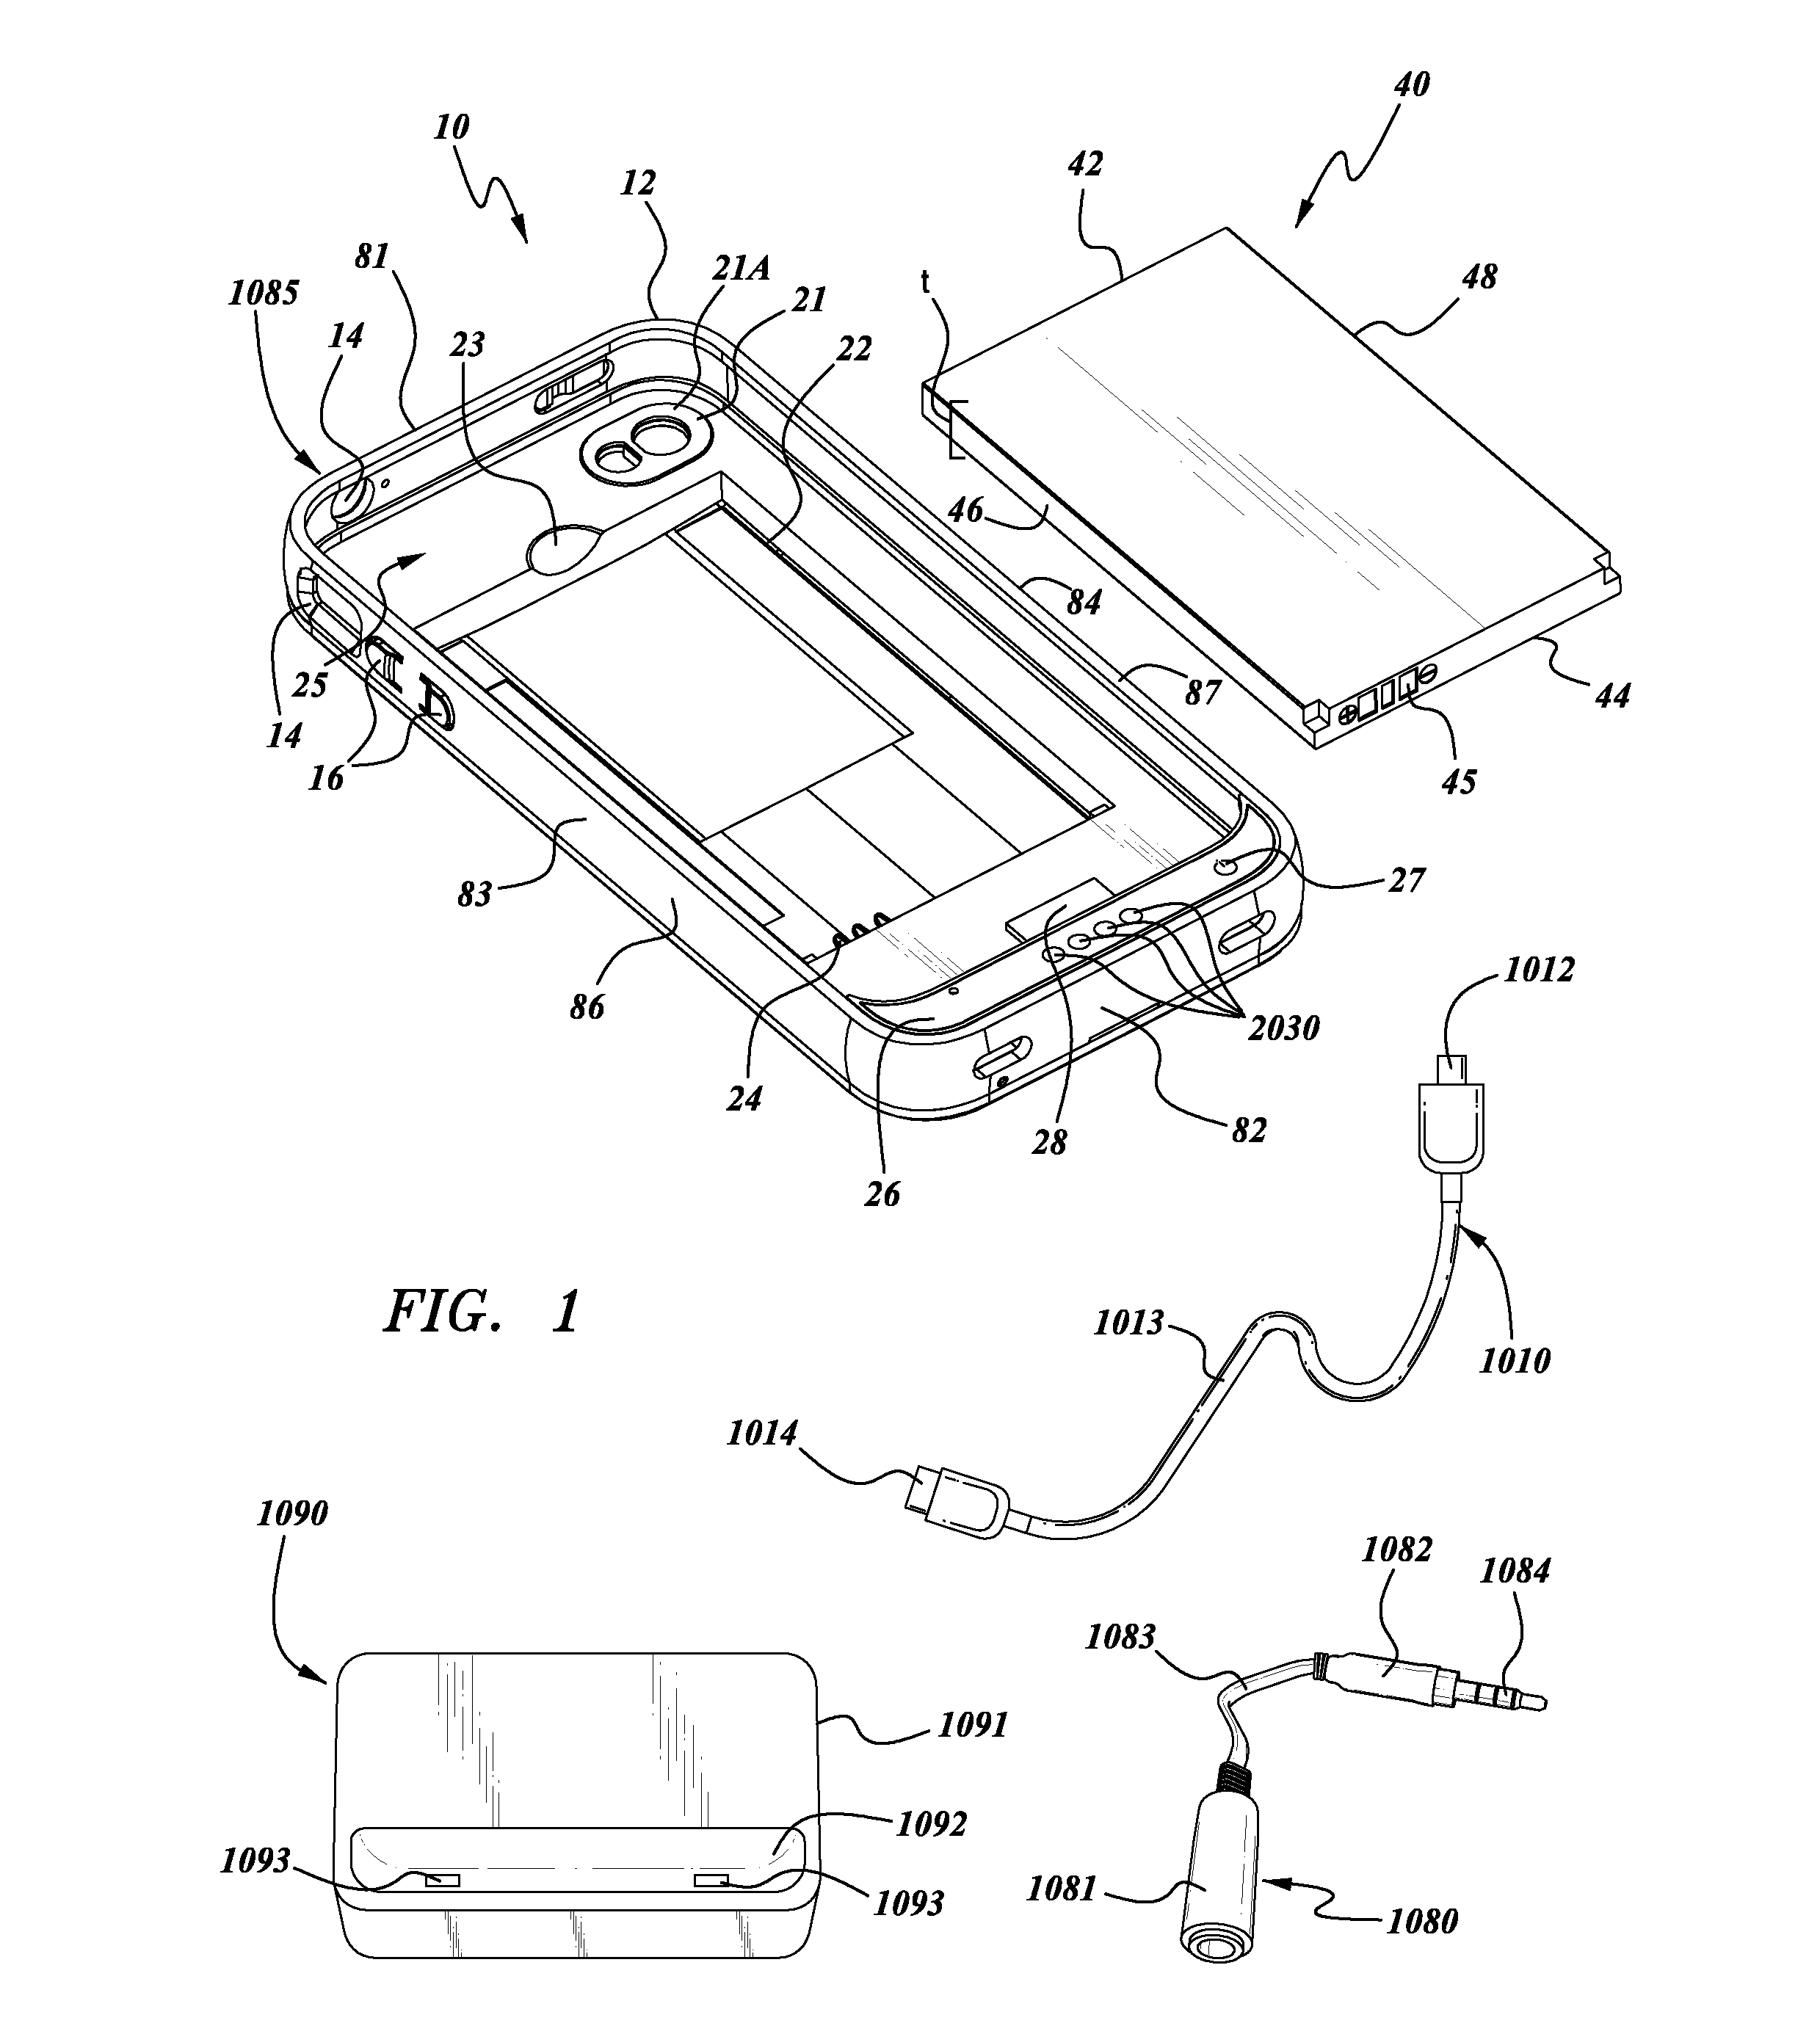 Protective case for mobile device with auxiliary battery and power control